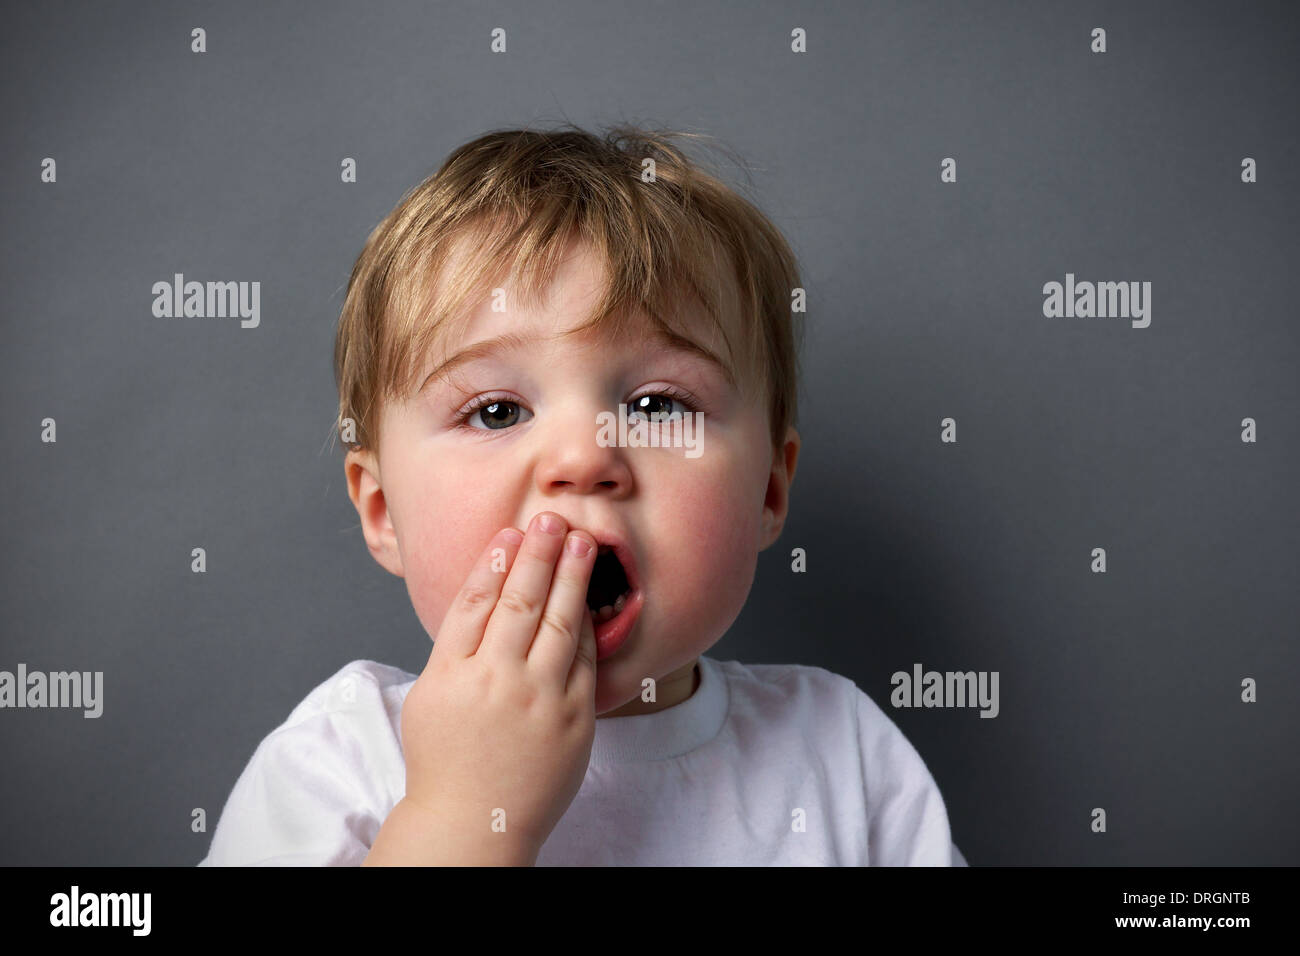 Little boy upset or hurting, toothache or other booboo concept. Stock Photo